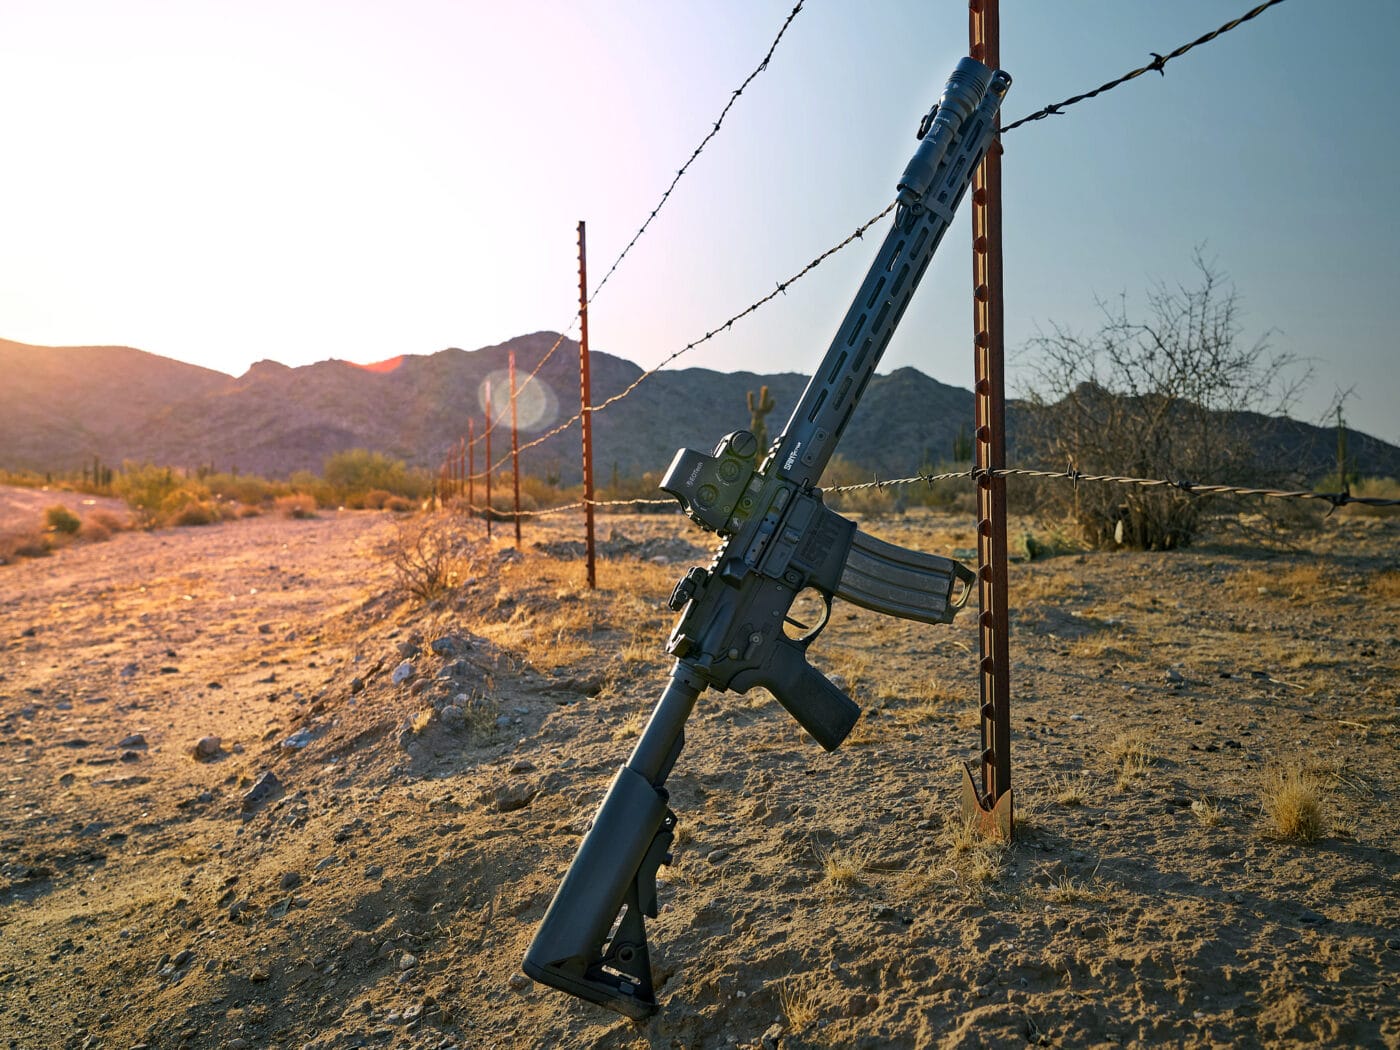 Springfield Armory SAINT Victor rifle leaning against a fence